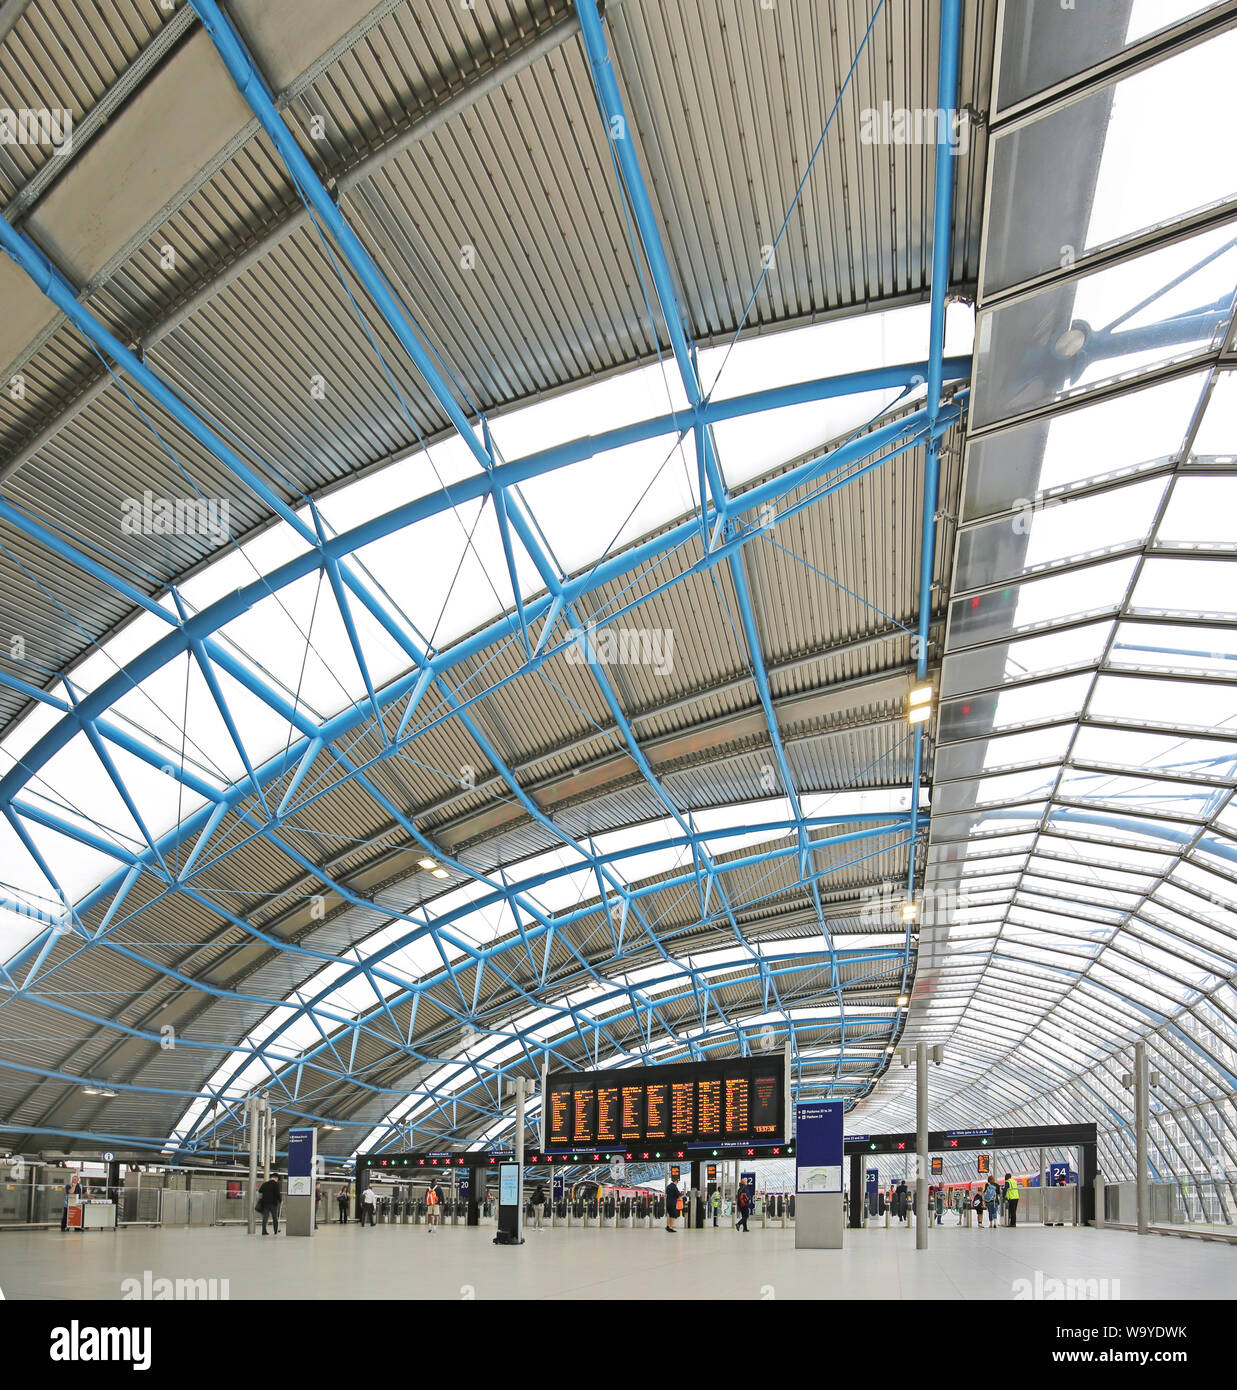 The old Eurostar terminal at London's Waterloo Station, UK, reopened in May 2019 as platforms 20-24 for Southwestern Railway local trains. Stock Photo